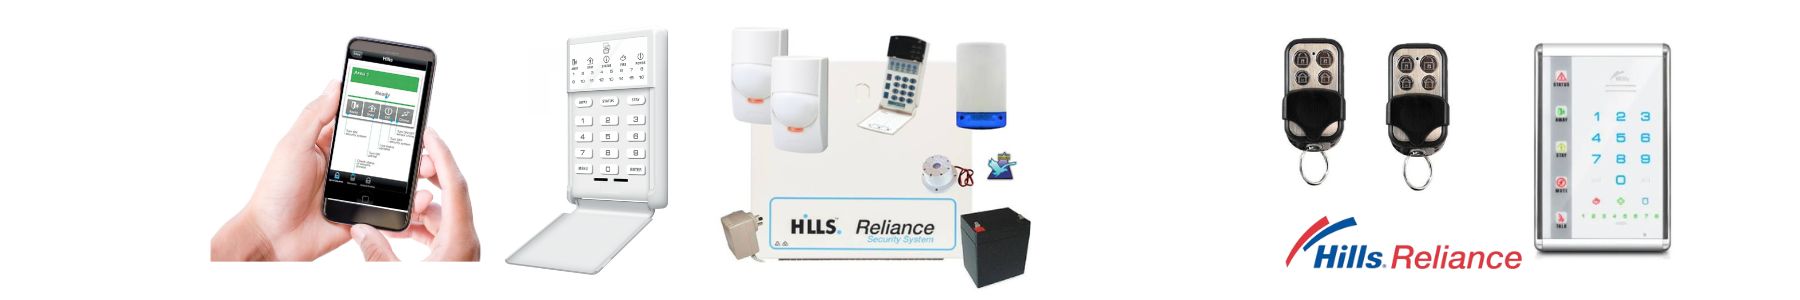 The Benefits of a Hills Reliance Security Alarm System